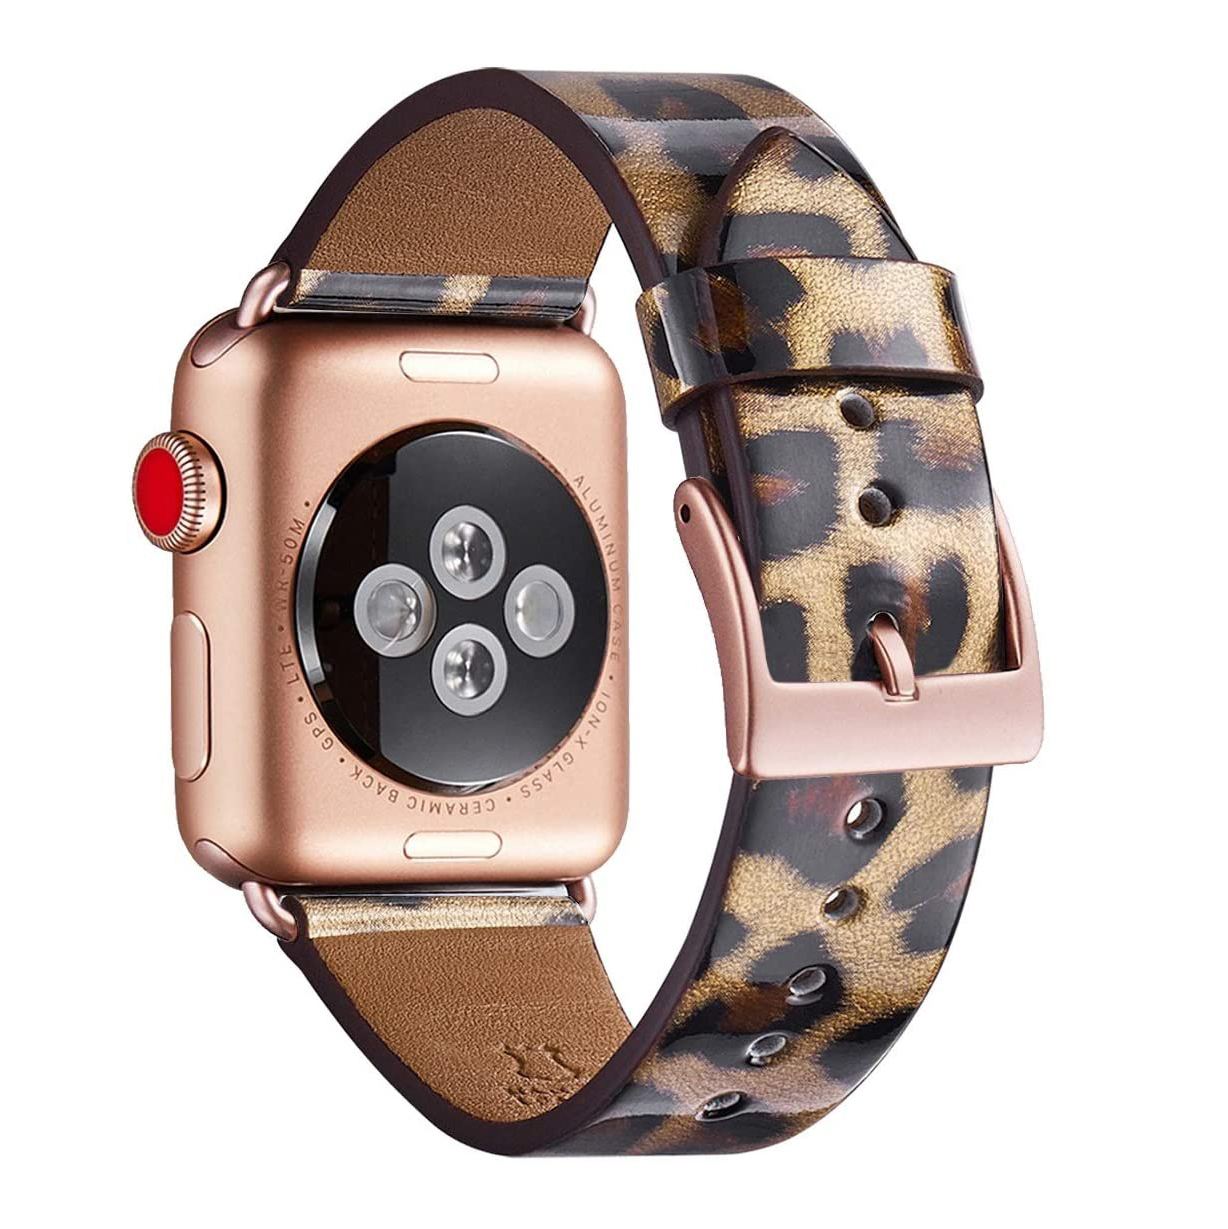 (Angry Tiger) Patterned Leather Wristband Strap for Apple Watch Series  4/3/2/1 gen,Replacement for iWatch 42mm / 44mm Bands